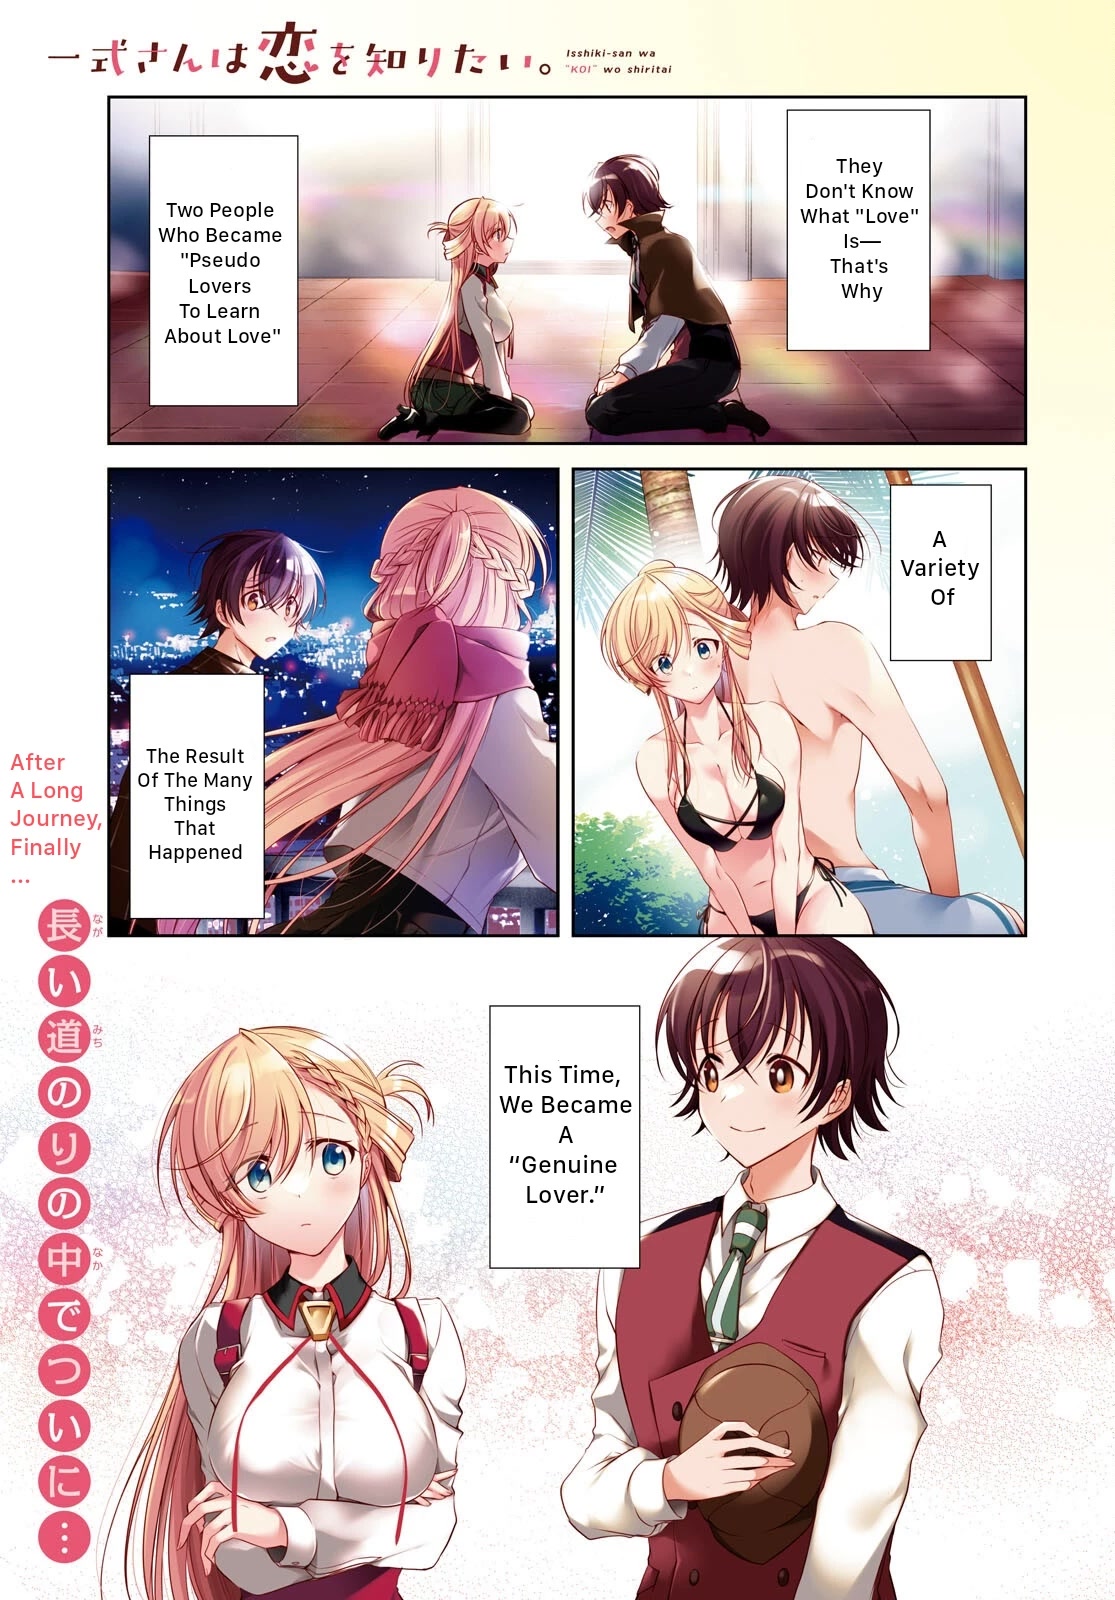 Isshiki-san Wants to Know About Love. - chapter 18 - #1